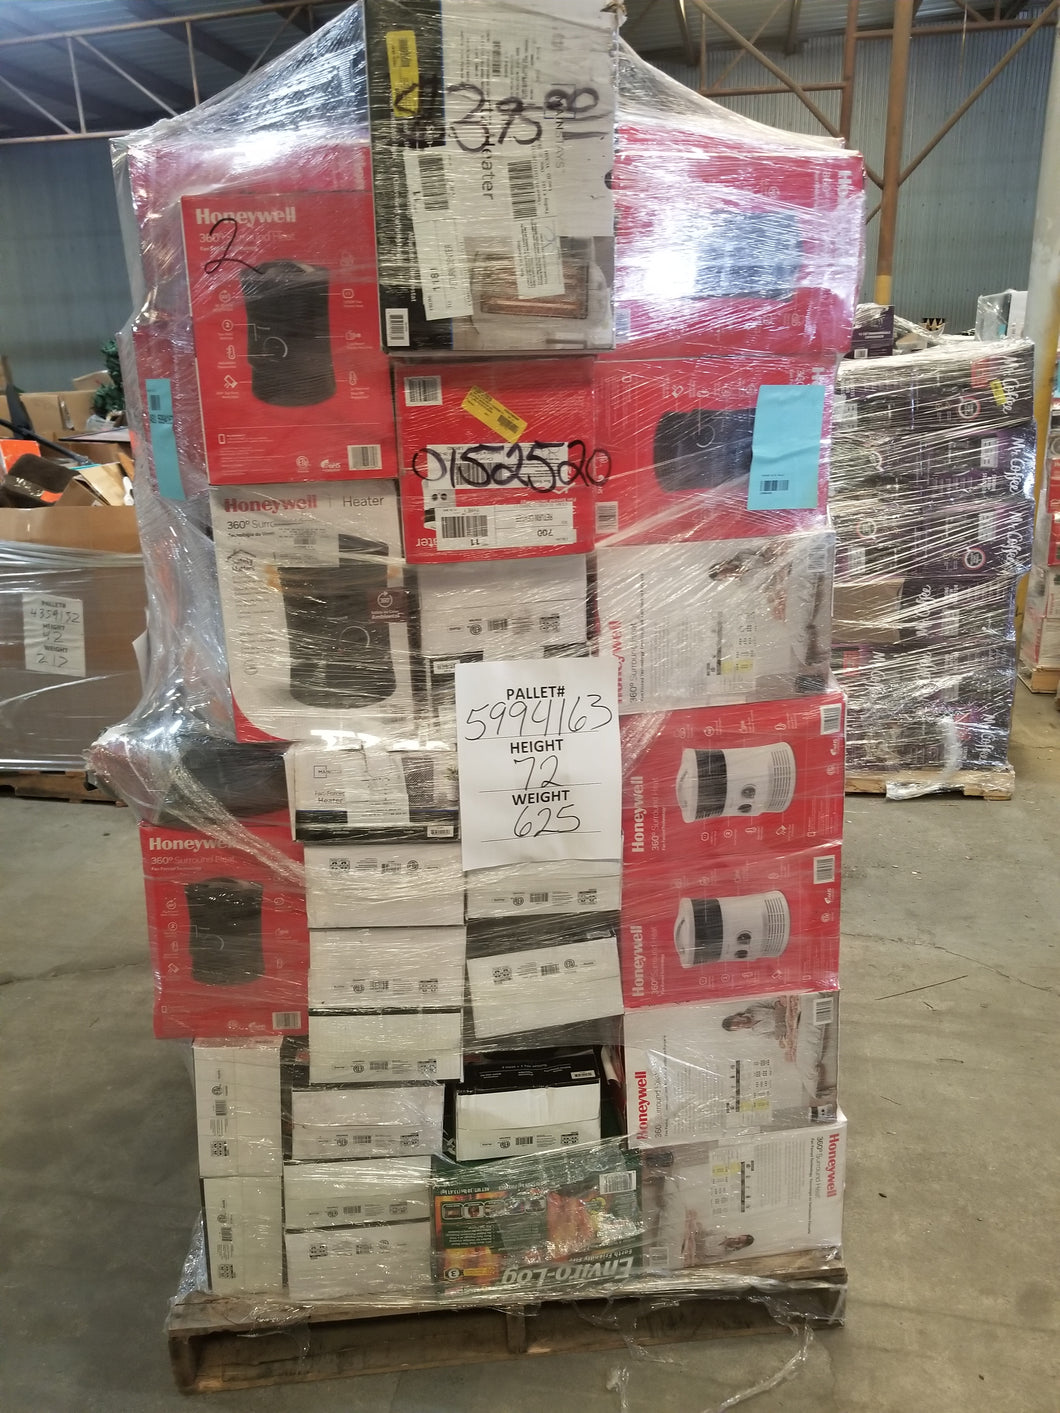 Wal-Mart Electric Heaters Pallet - 0152520